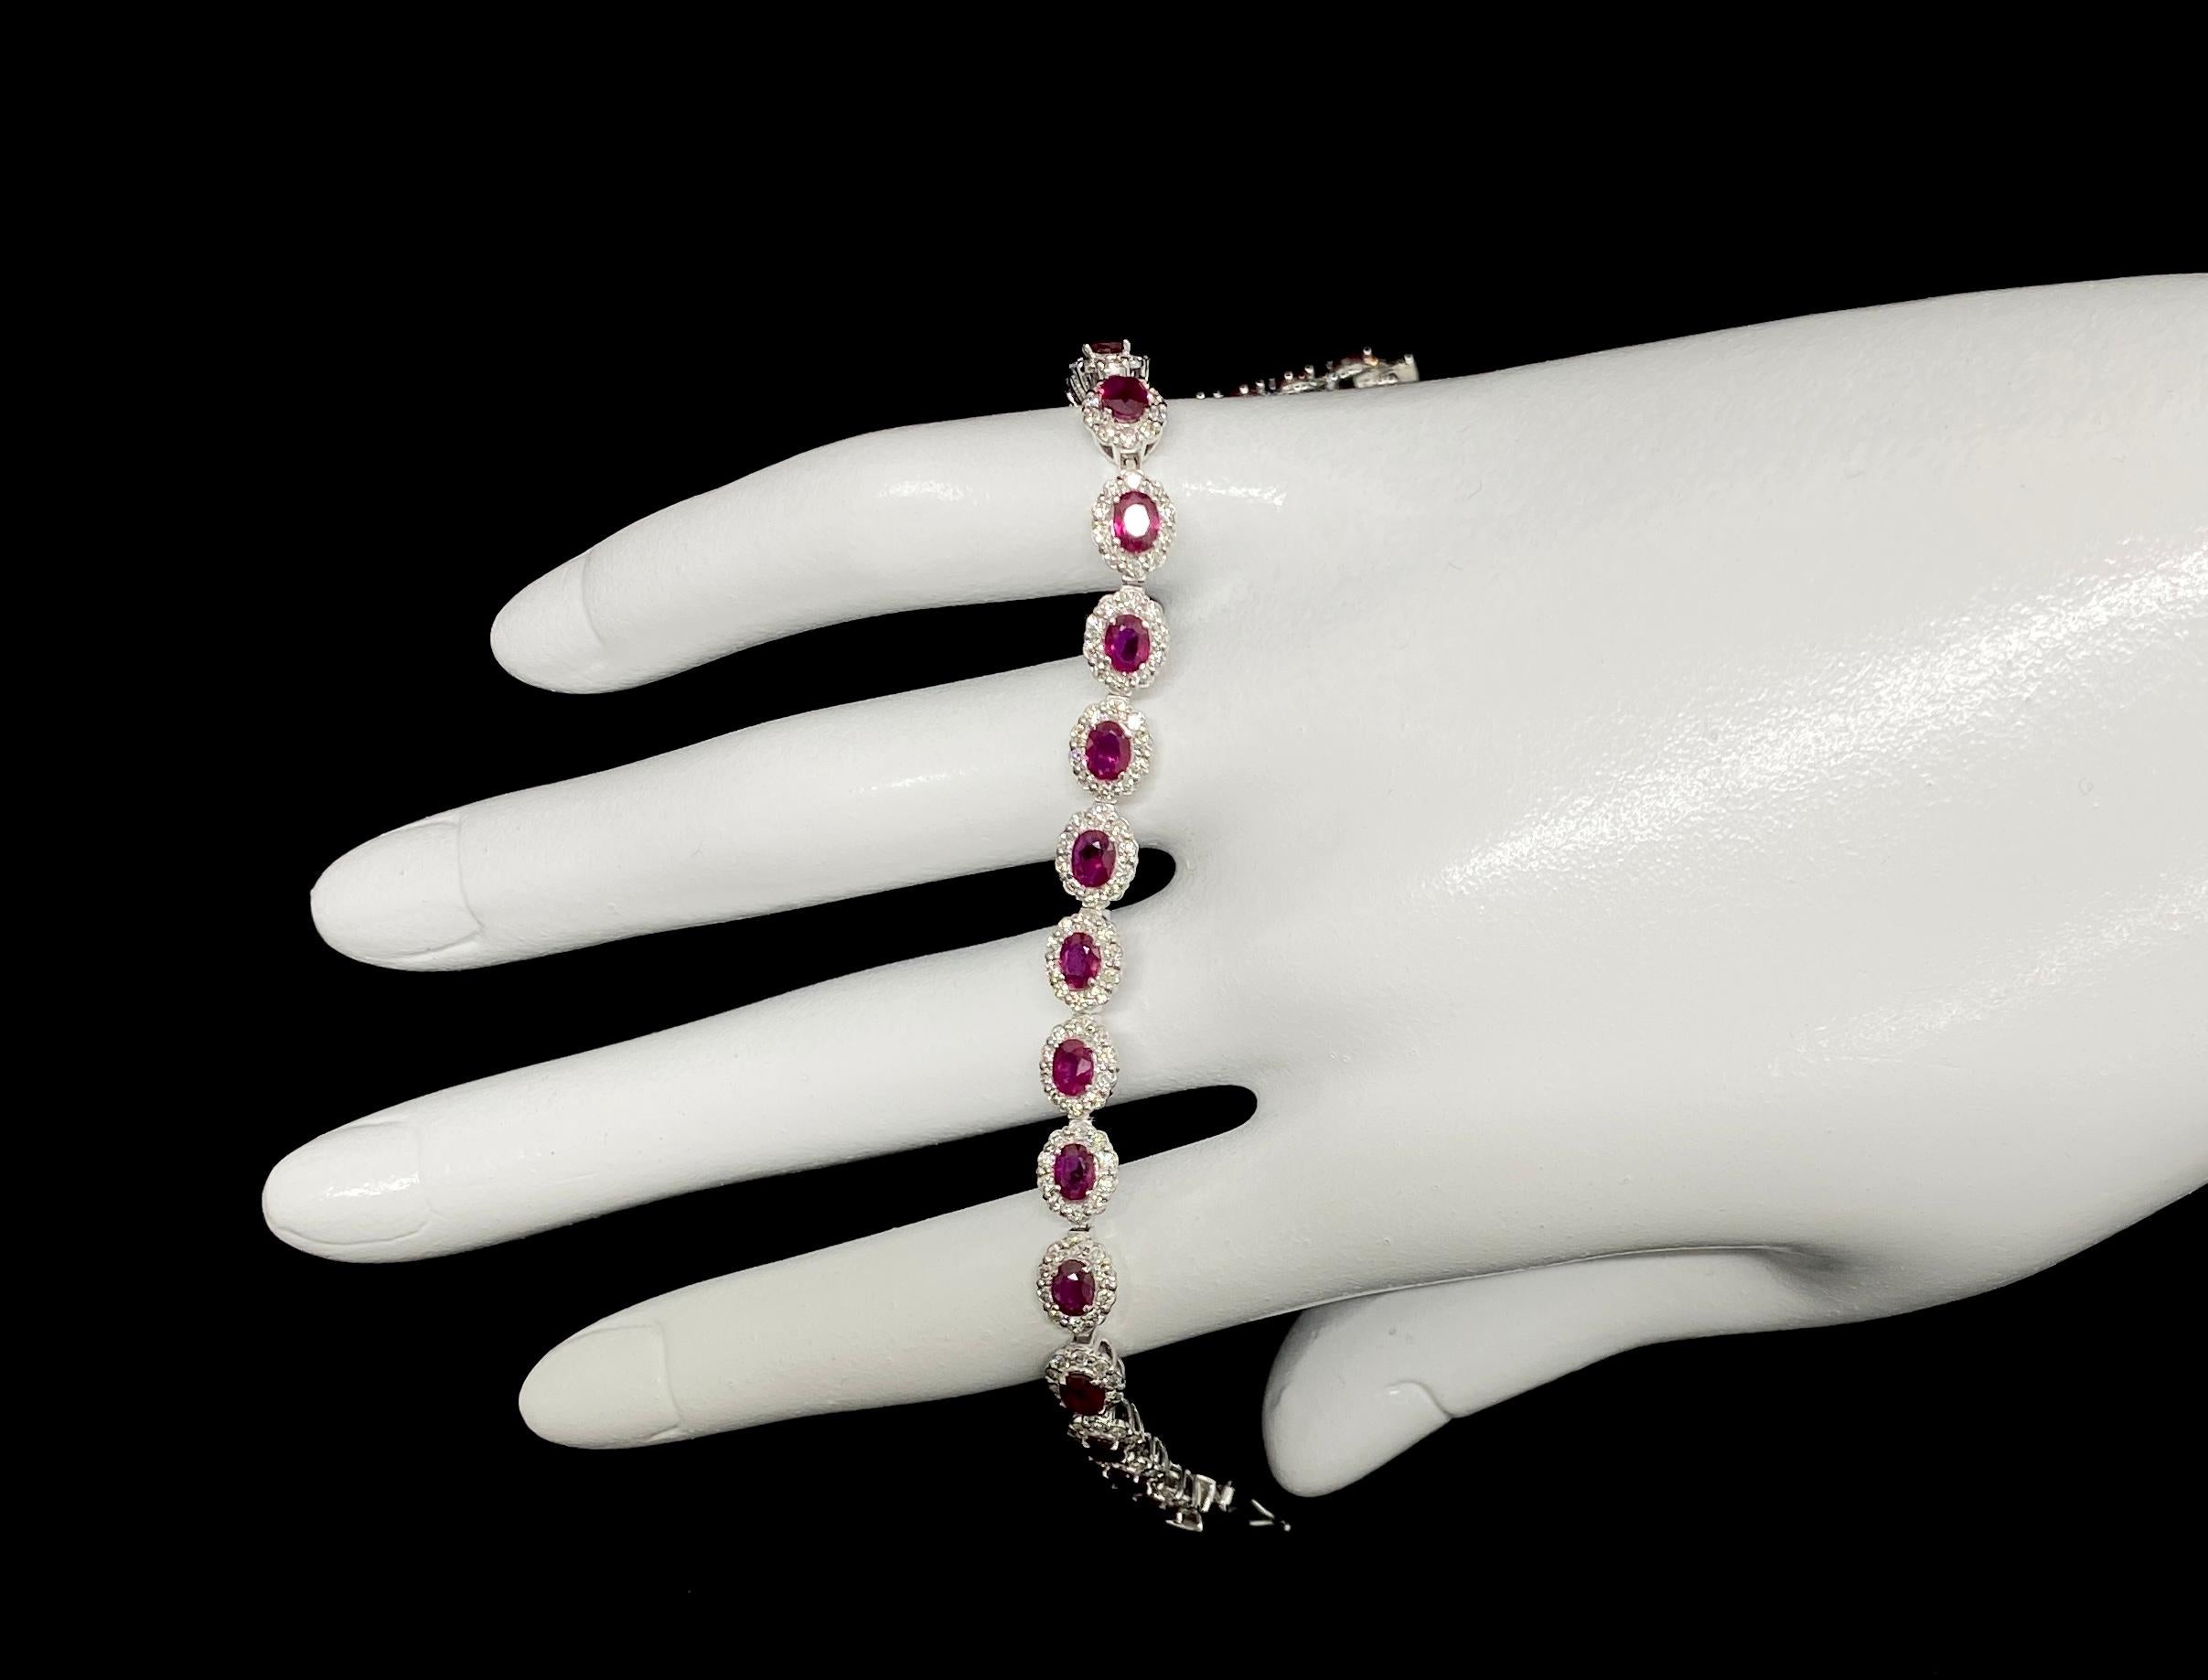 A beautiful Tennis Bracelet featuring a total of 4.62 Carats of Natural Rubies and 1.74 Carats of Diamond Accents set in Platinum. The Rubies are of 4x3mm size. Rubies are referred to as 